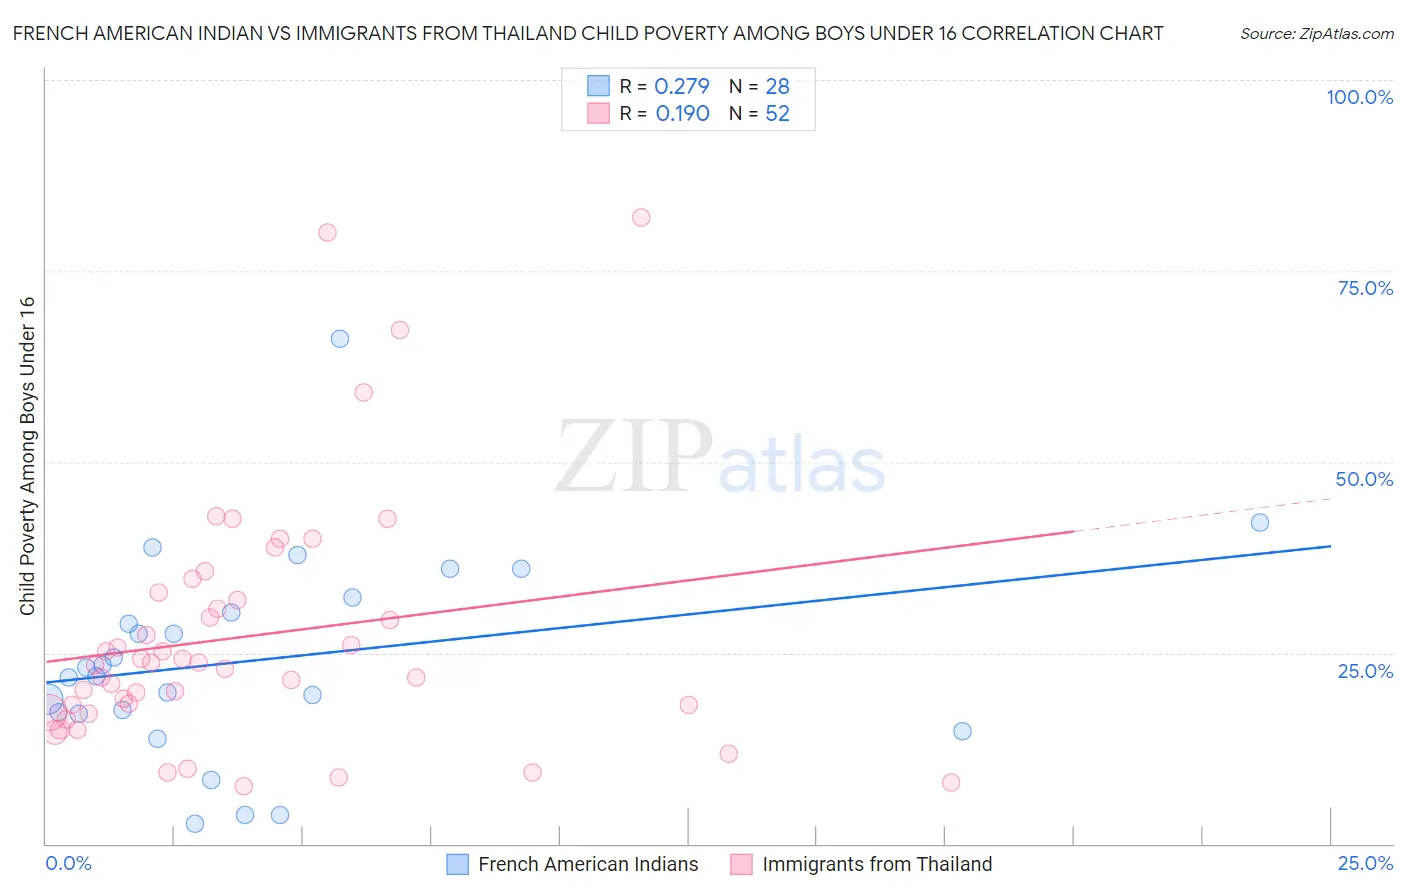 French American Indian vs Immigrants from Thailand Child Poverty Among Boys Under 16